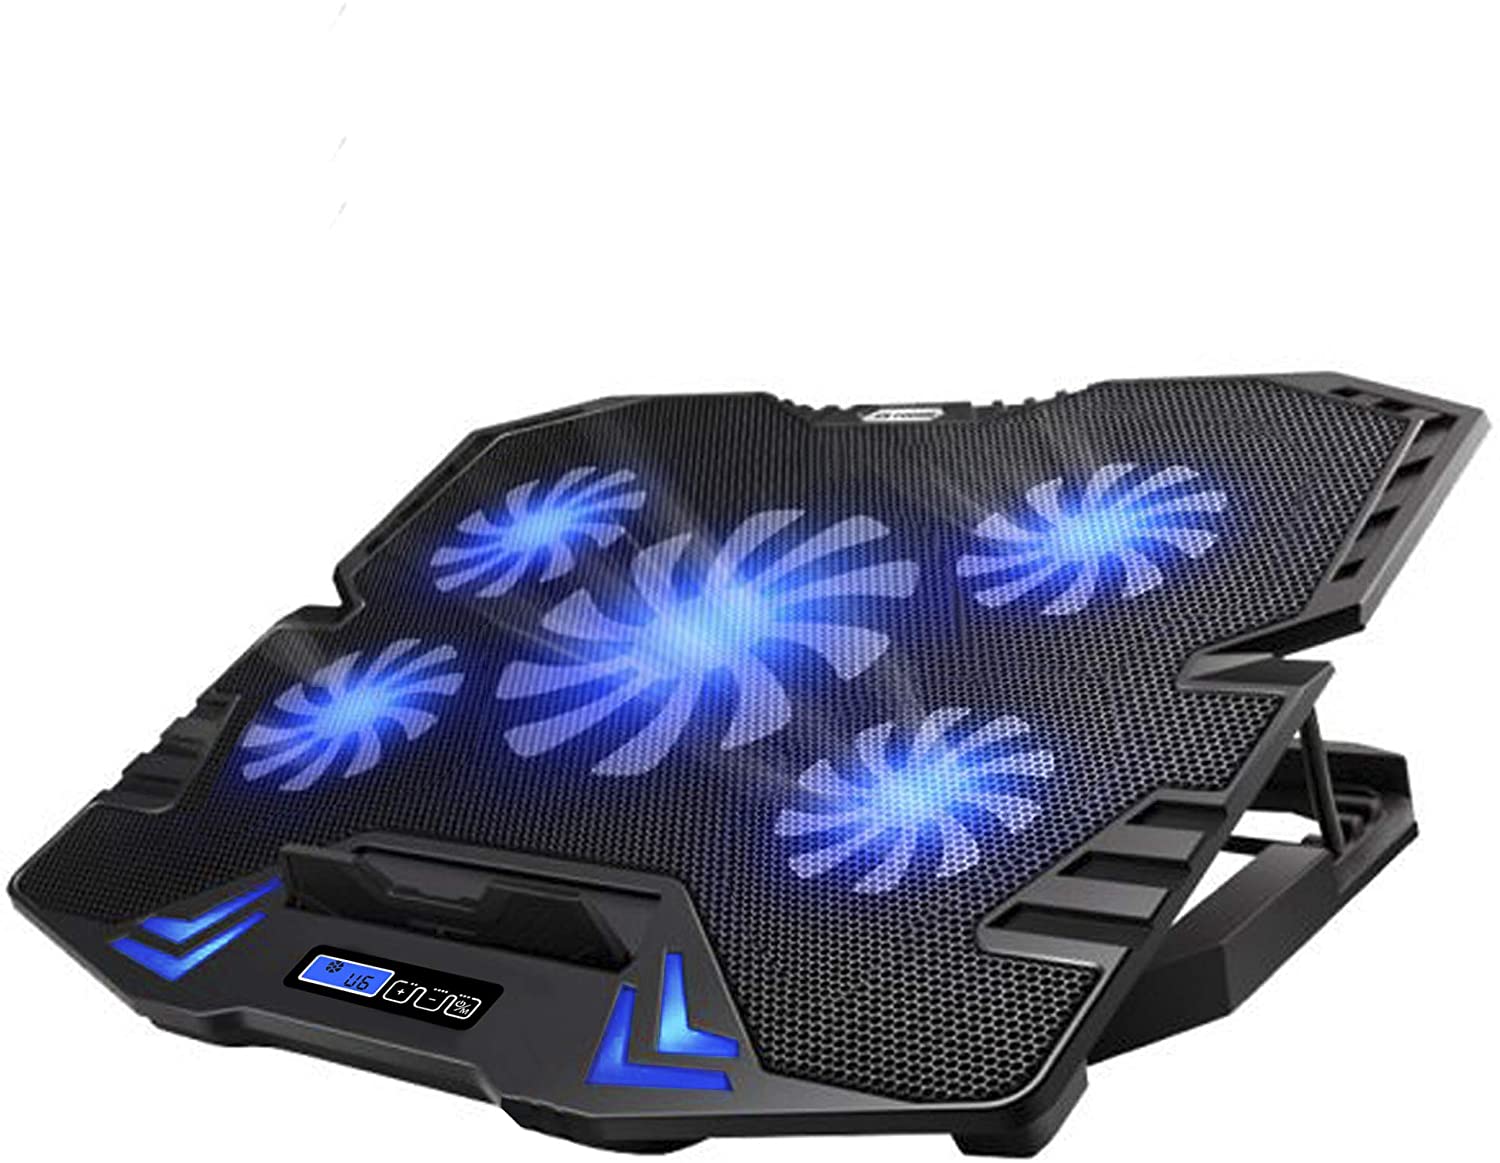 <strong>TopMate C5 10-15.6 Inch Gaming Laptop Cooler Cooling Pad</strong>